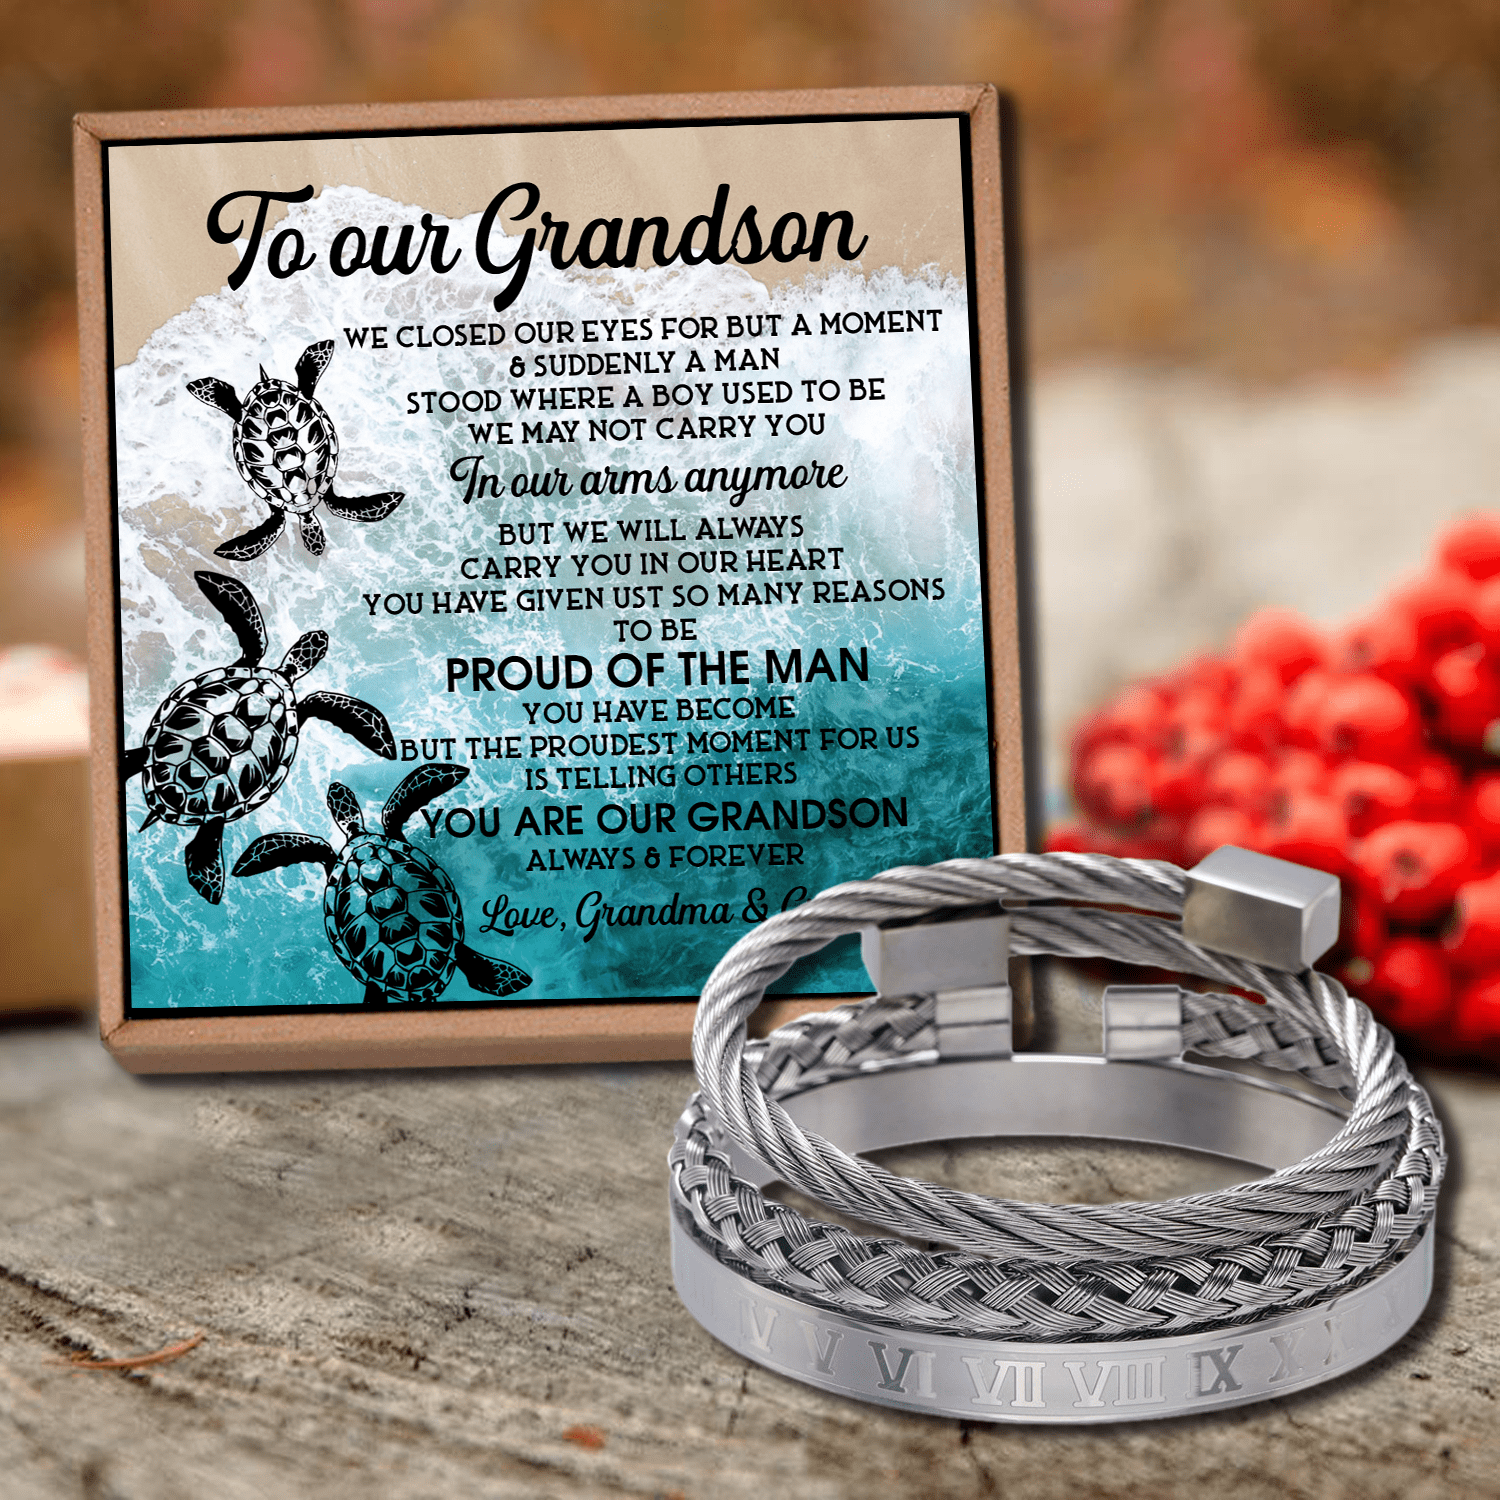 Bracelets To Our Grandson - Proud Of The Man Roman Numeral Bracelet Set Silver GiveMe-Gifts